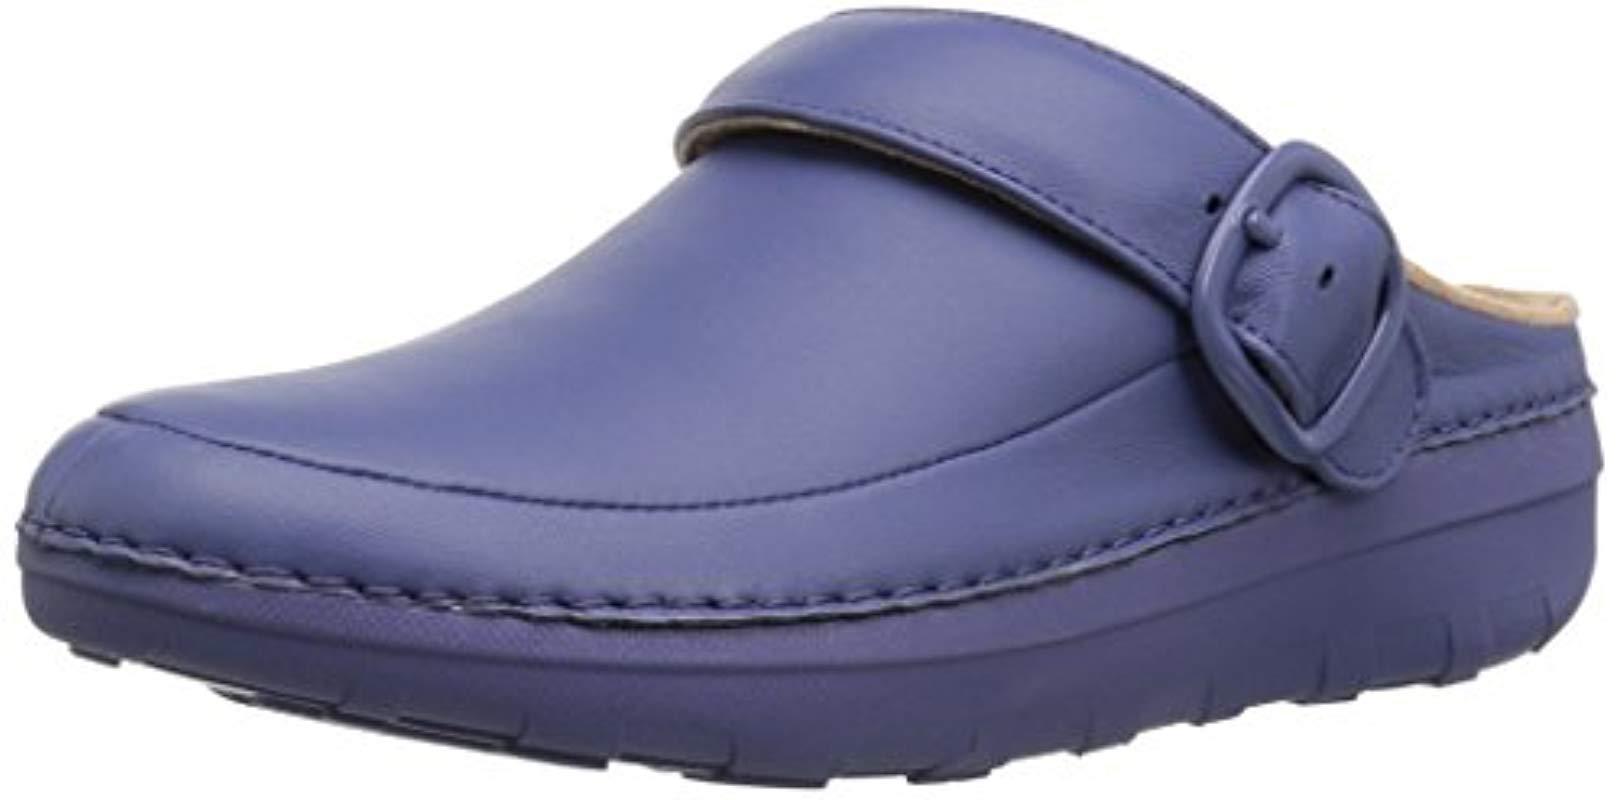 fitflop gogh pro clogs